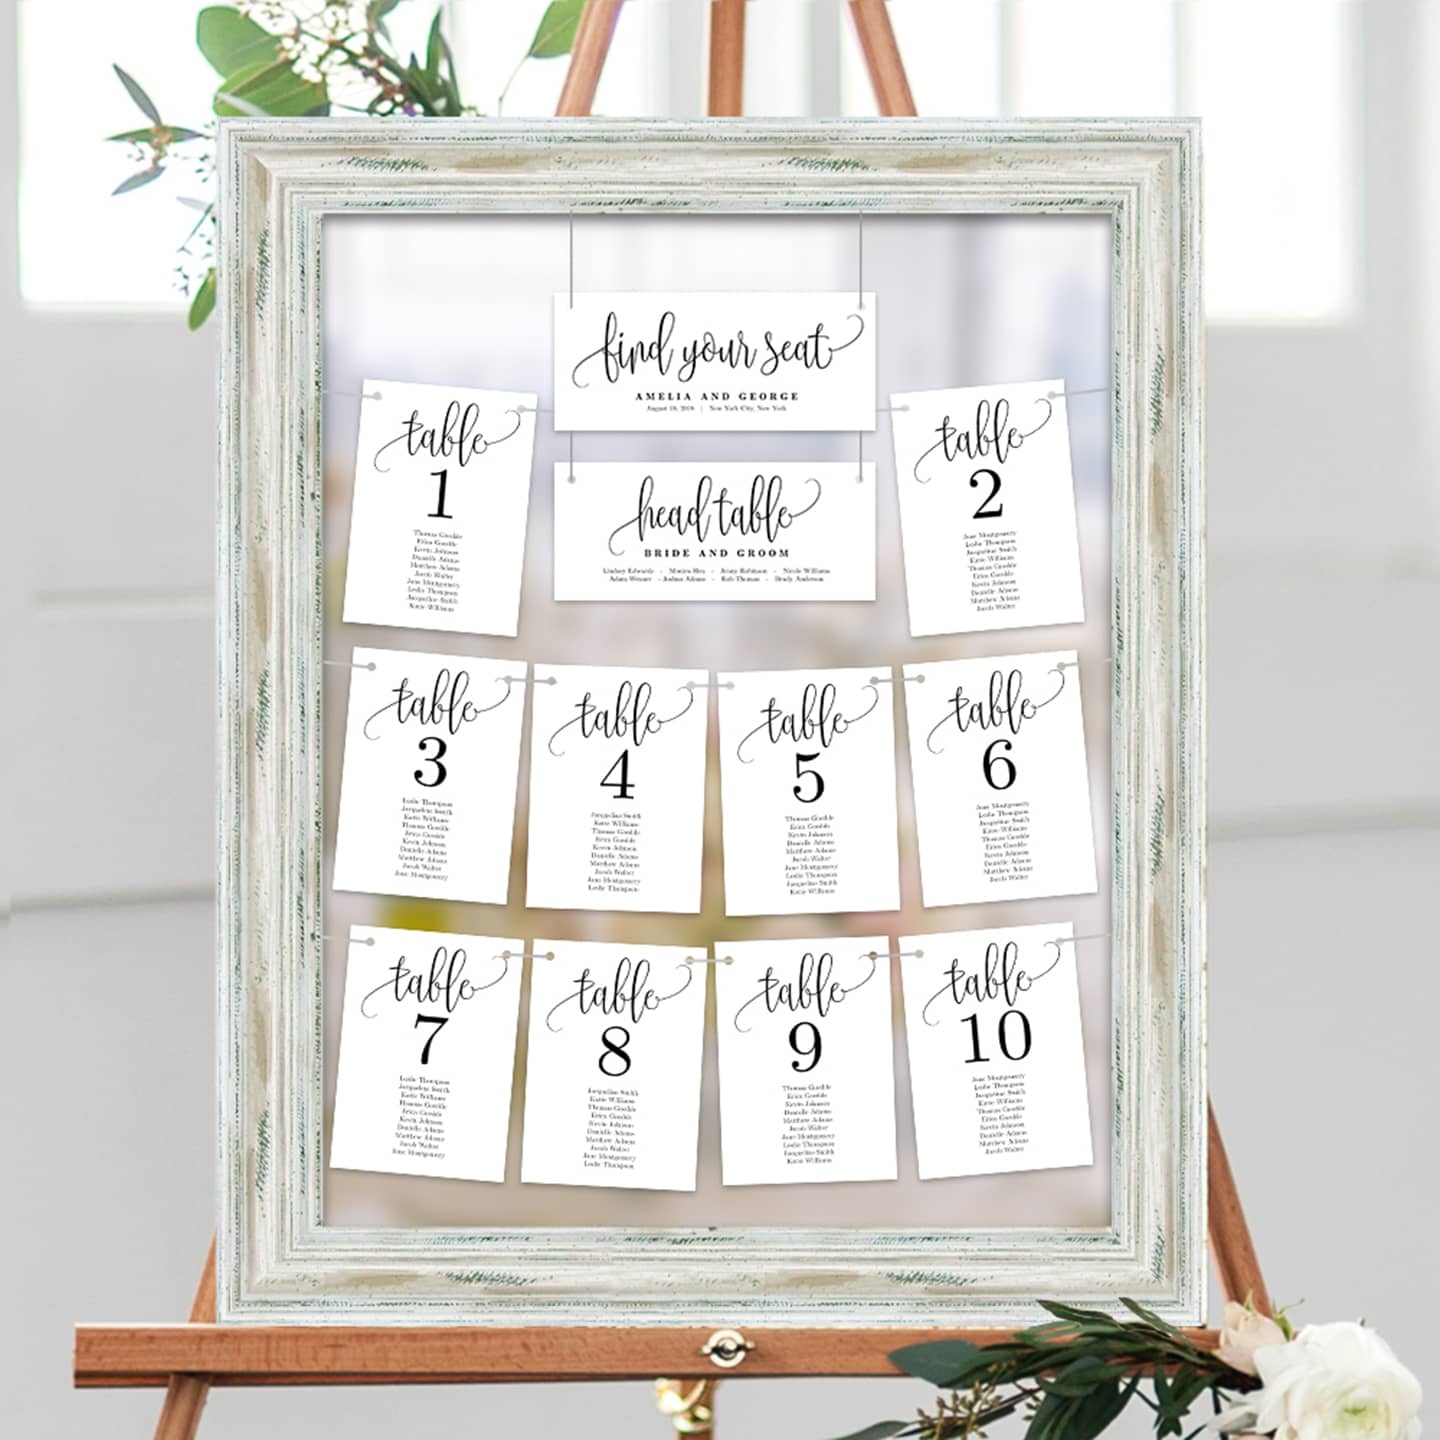 Seating Arrangement Cards Find your Seat Cards Custom Seating Chart Rustic Seating Chart